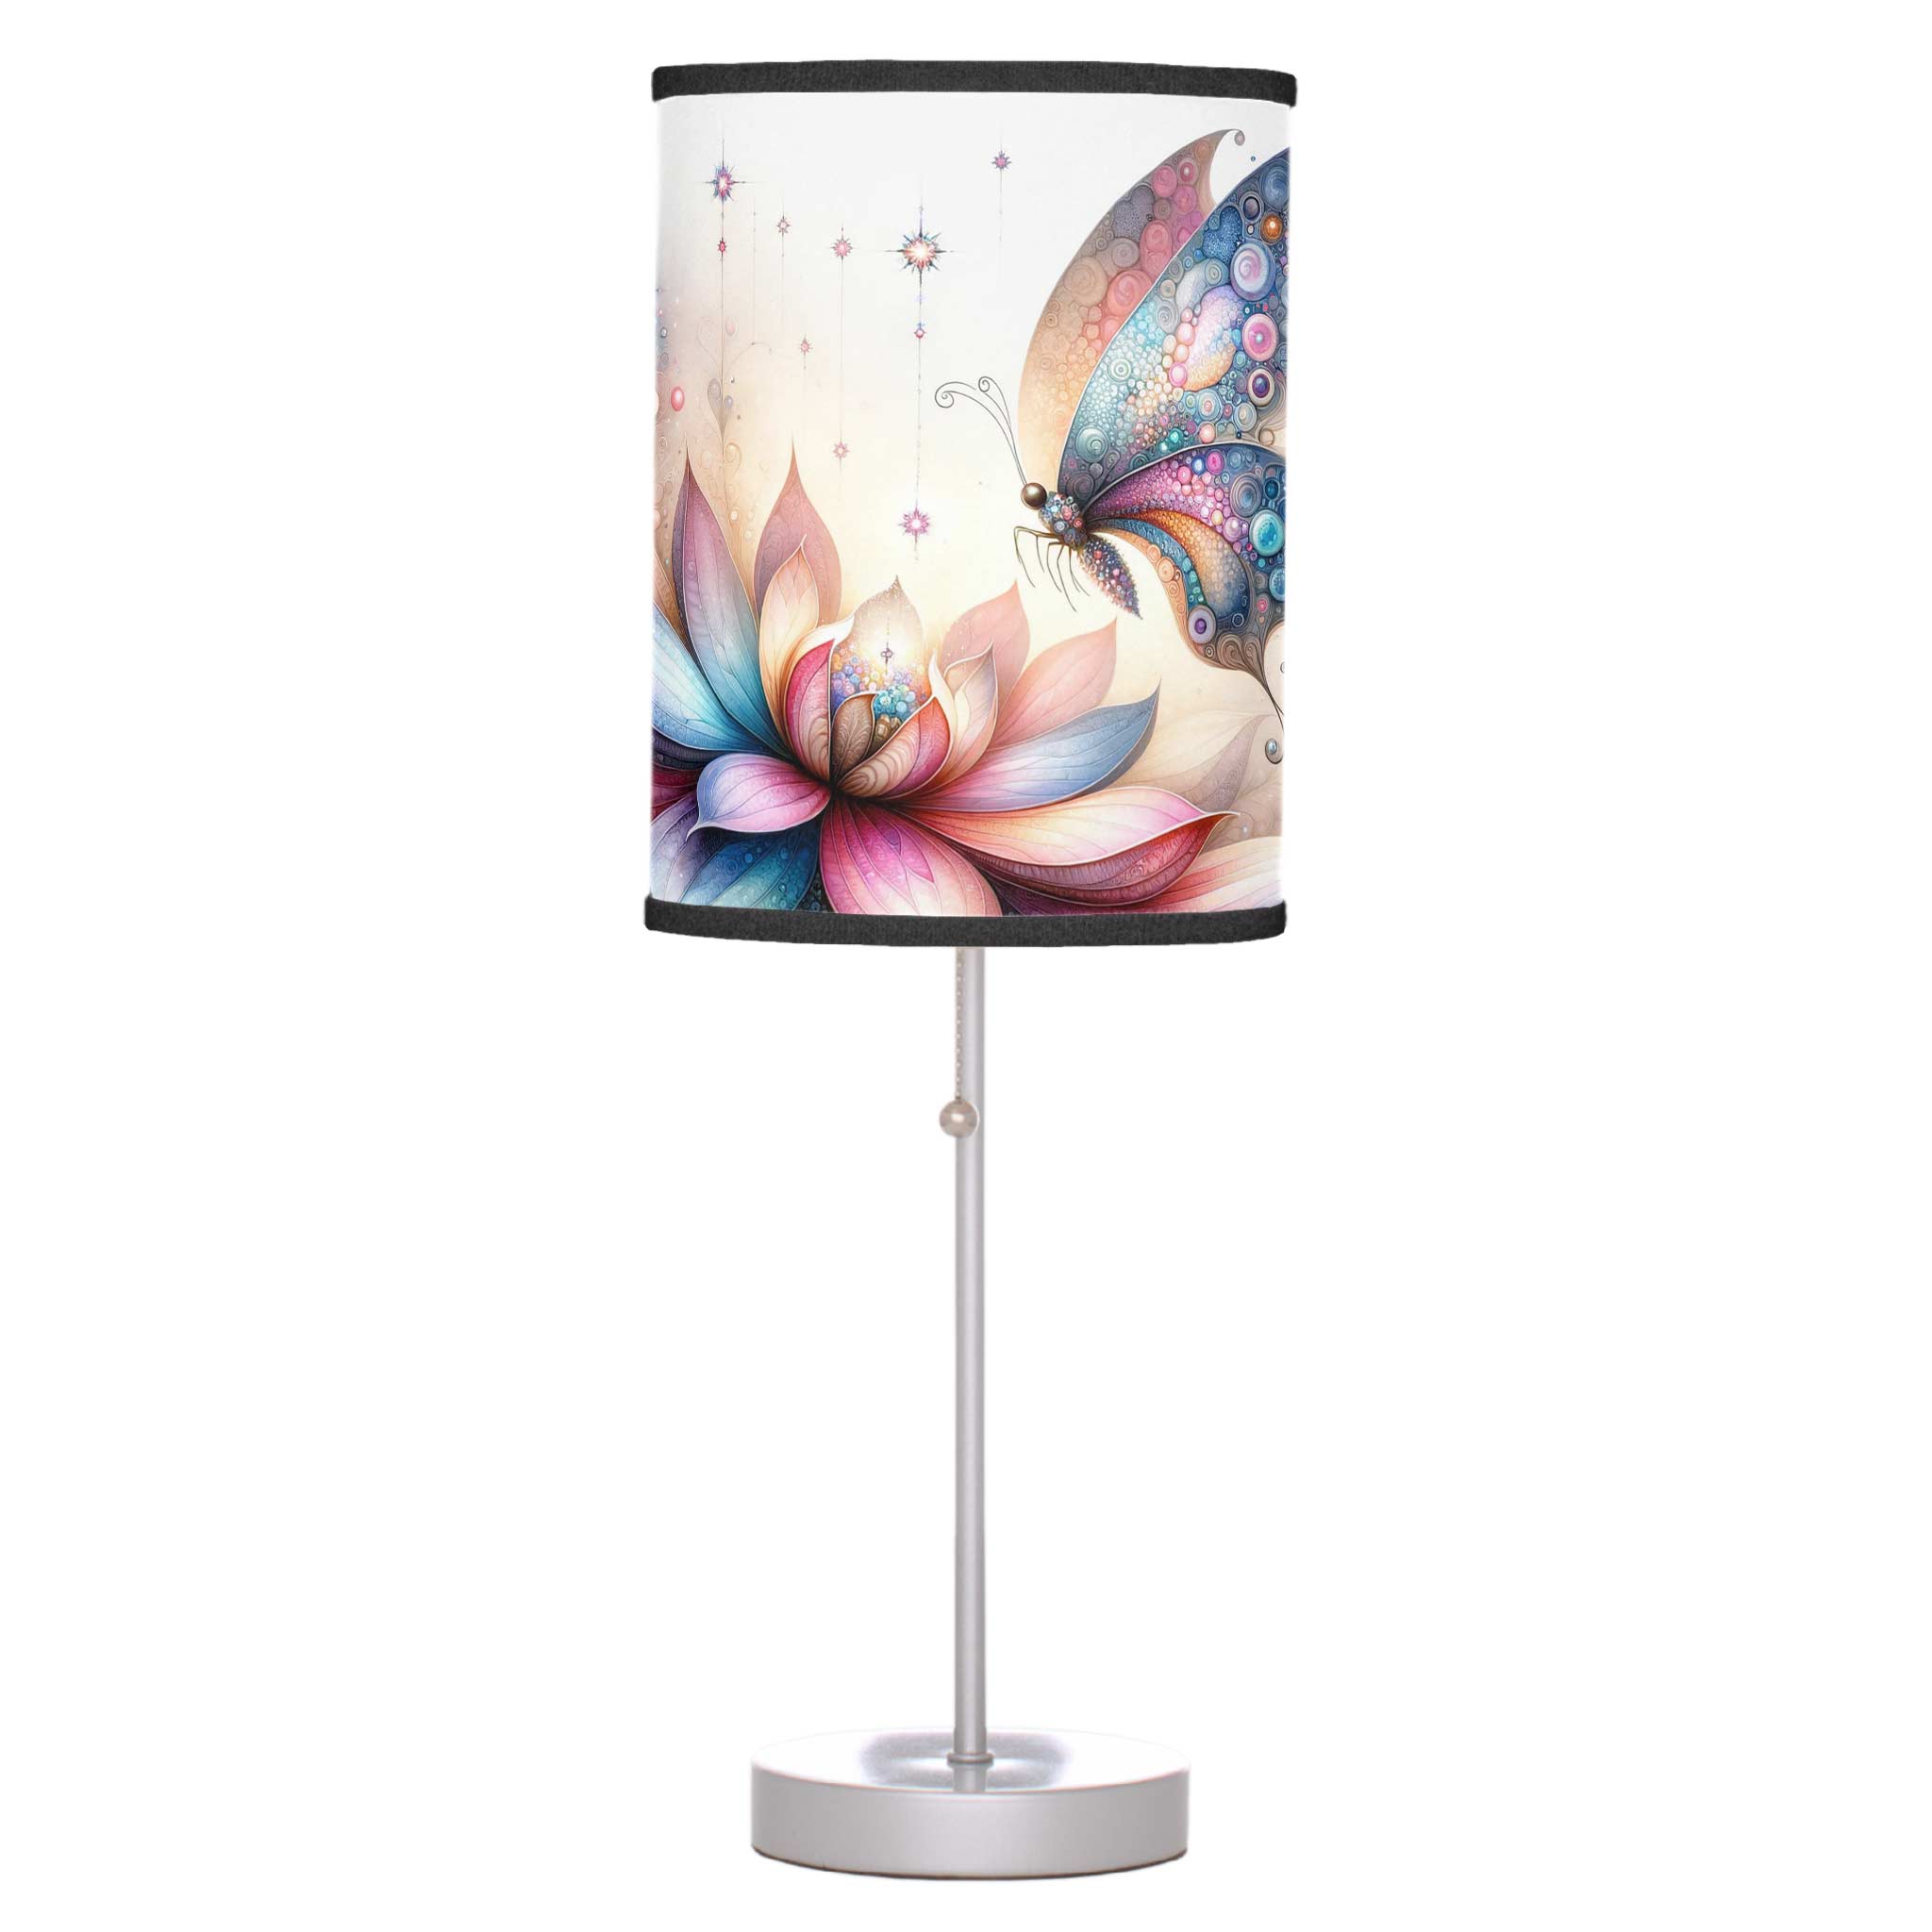 Fairy-tale butterfly lamp. Click to shop.